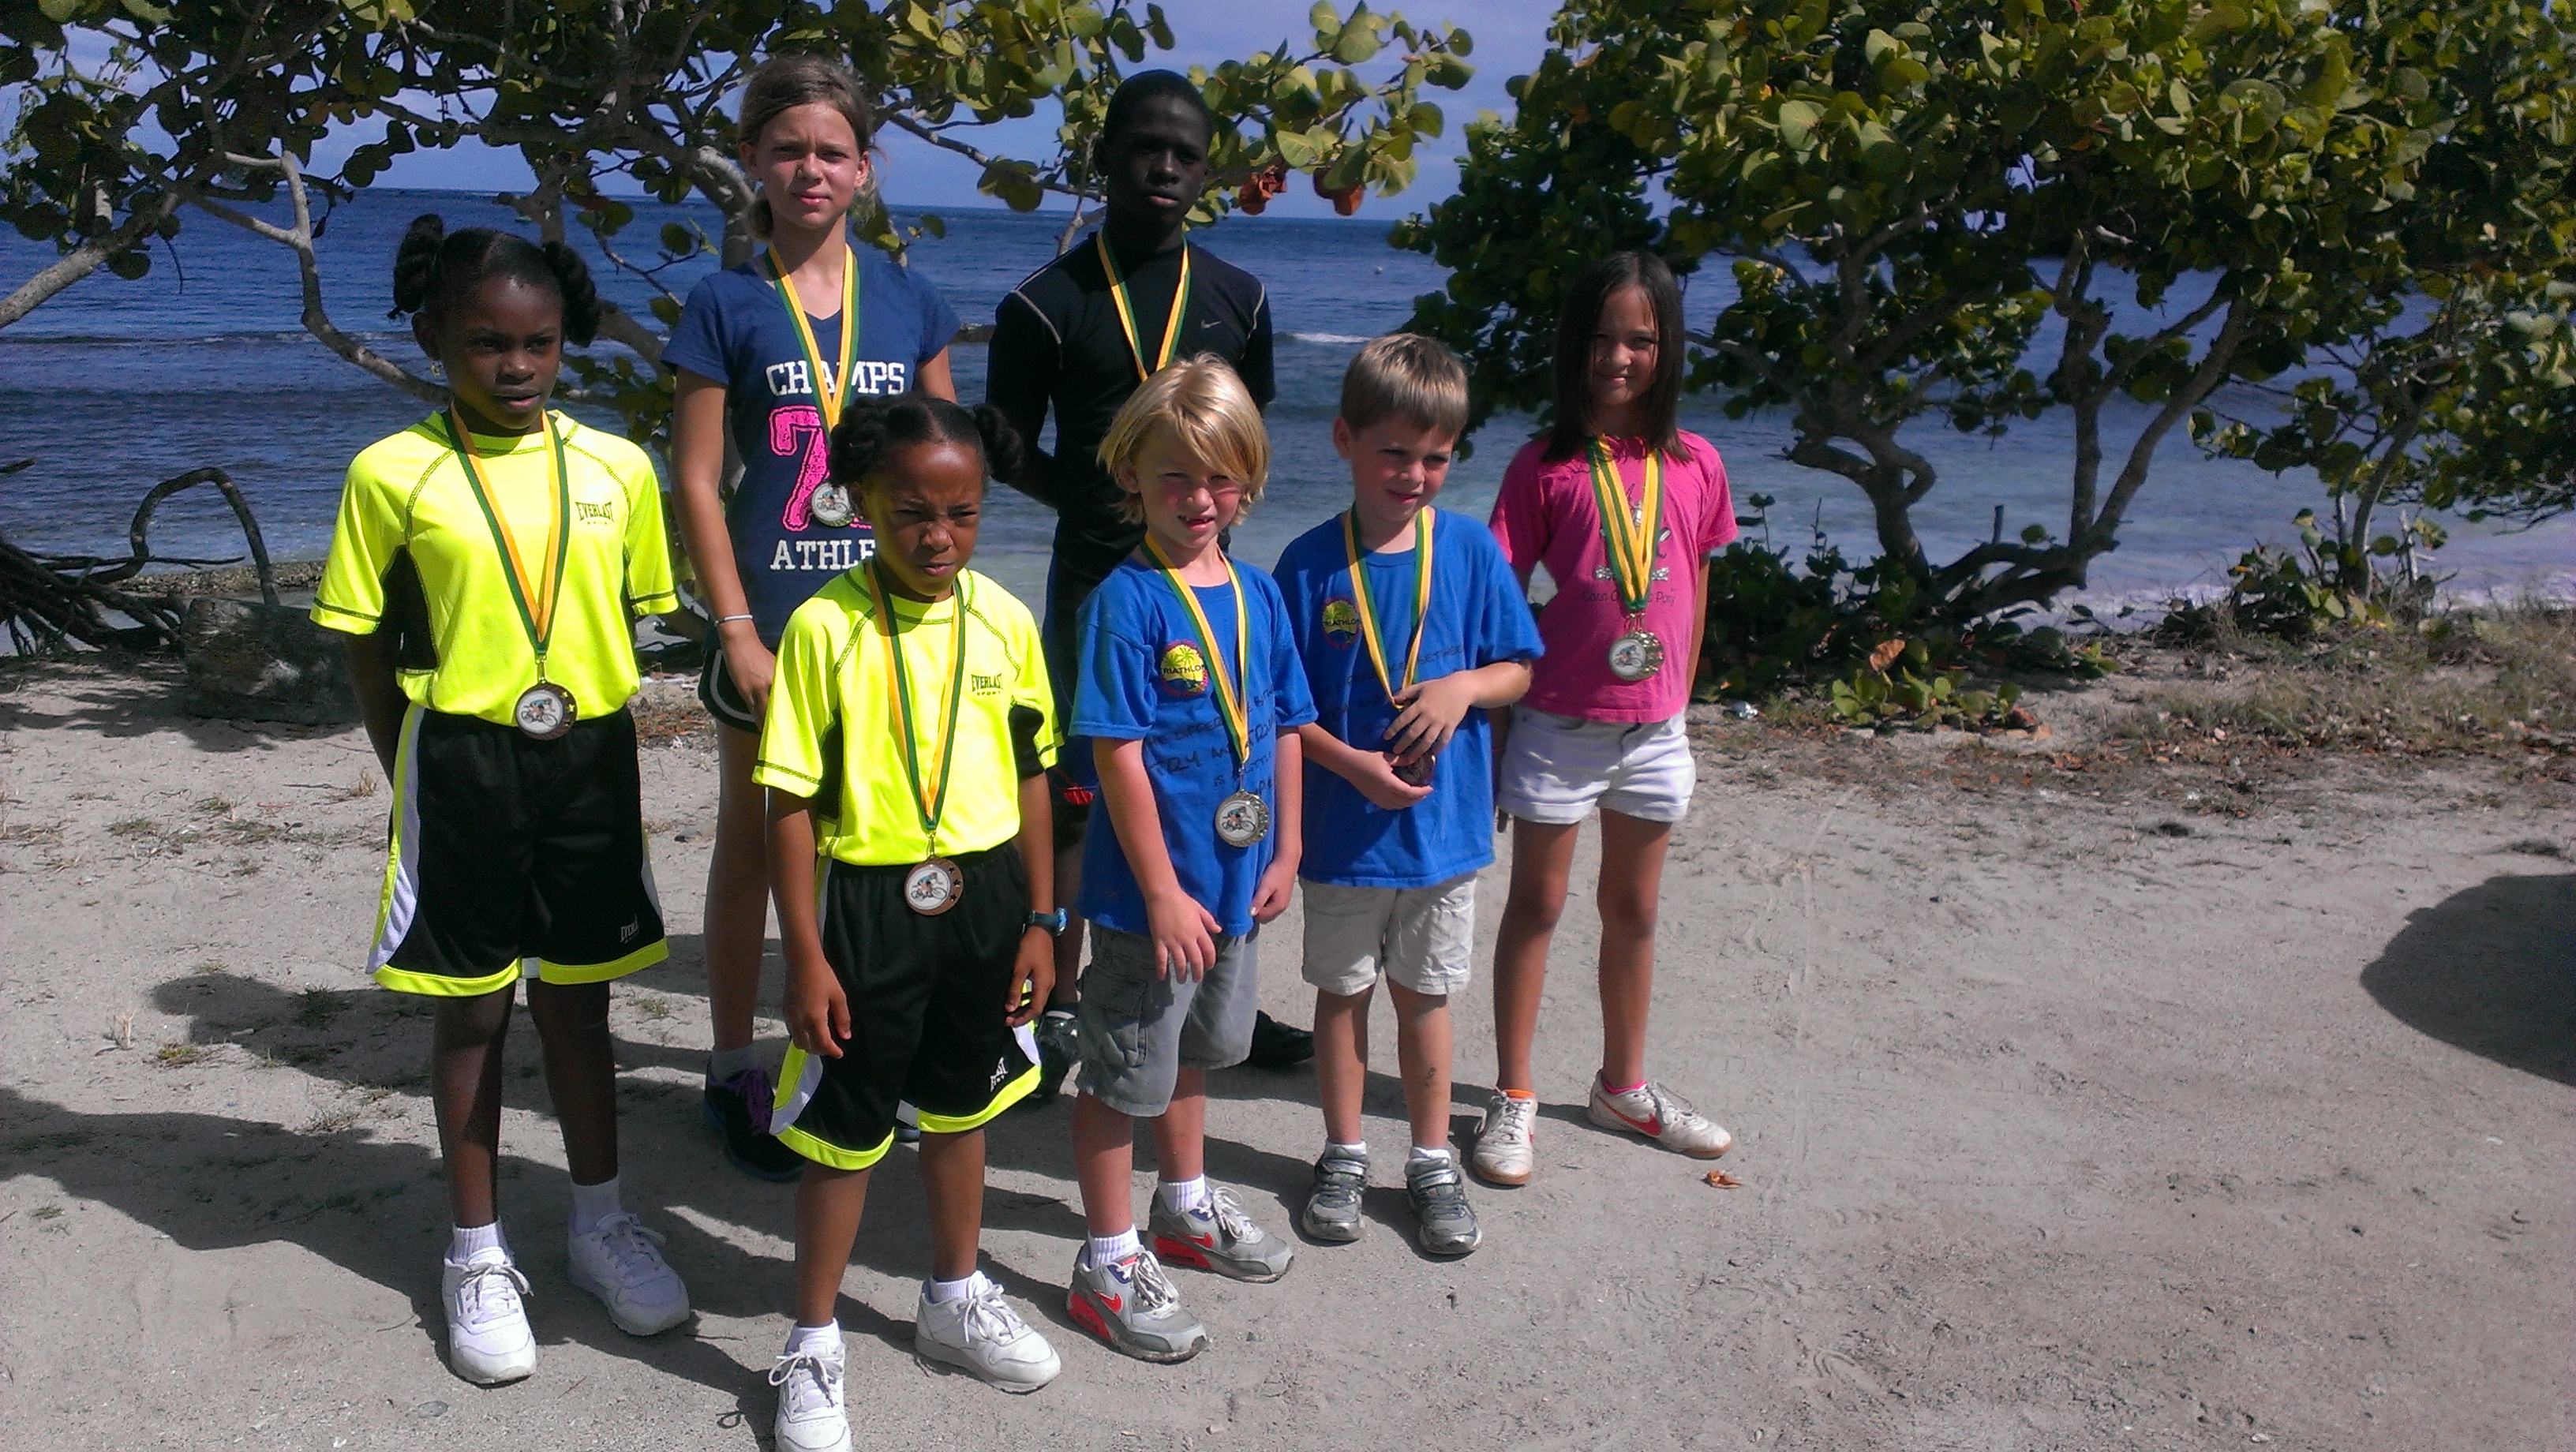 Conch Shell Classic Youth Bike Race participants